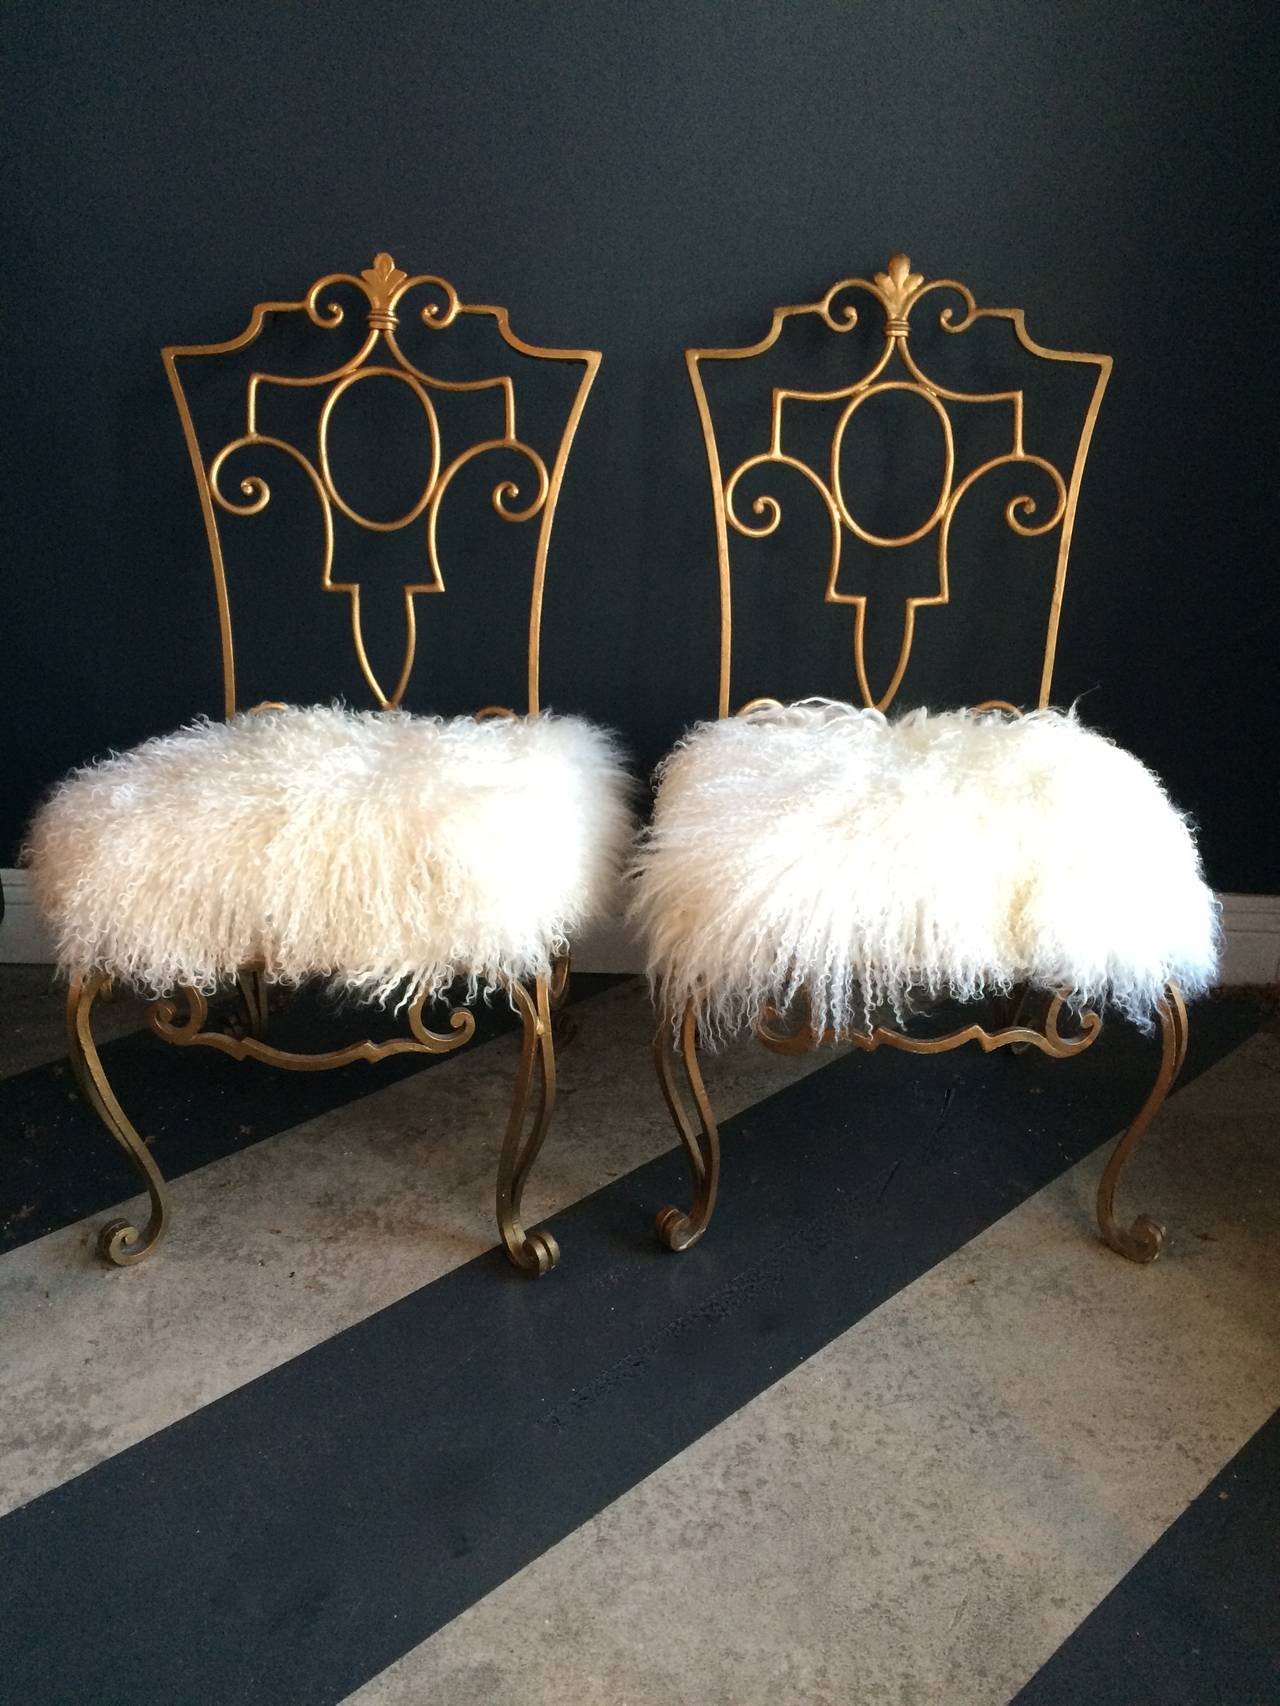 Exquisite wrought iron chairs by French designer, Jean-Charles Moreux wrought iron chairs, this duo have removable Mongolian fur cushions, low and sophisticated, a compliment to any room or outdoor with or without a cushion.